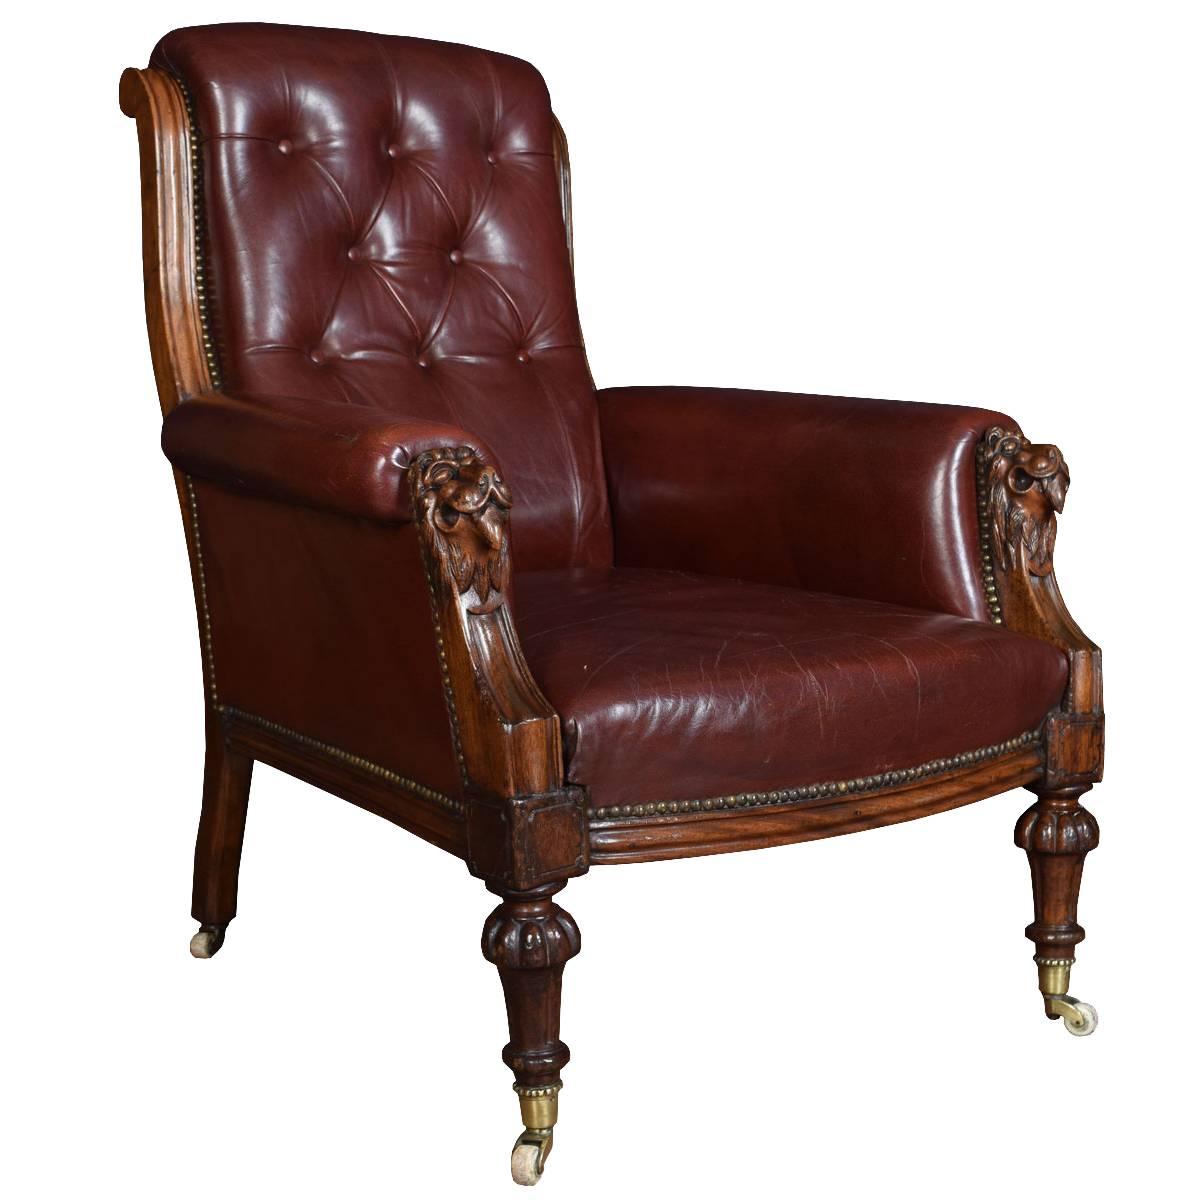 Victorian Burgundy Leather Upholstered Mahogany Framed Armchair